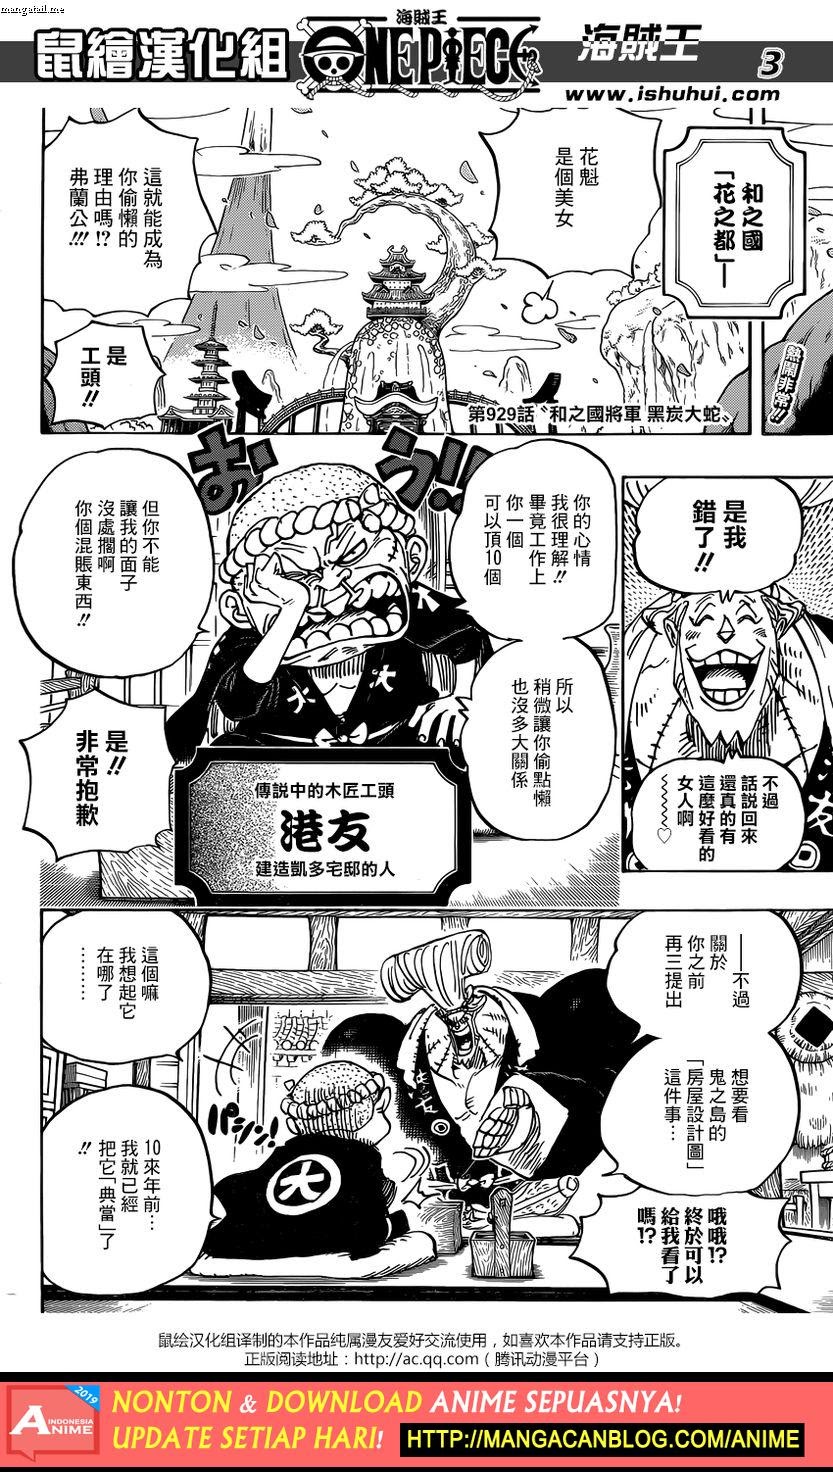 One Piece Chapter 928 – Raw - 95